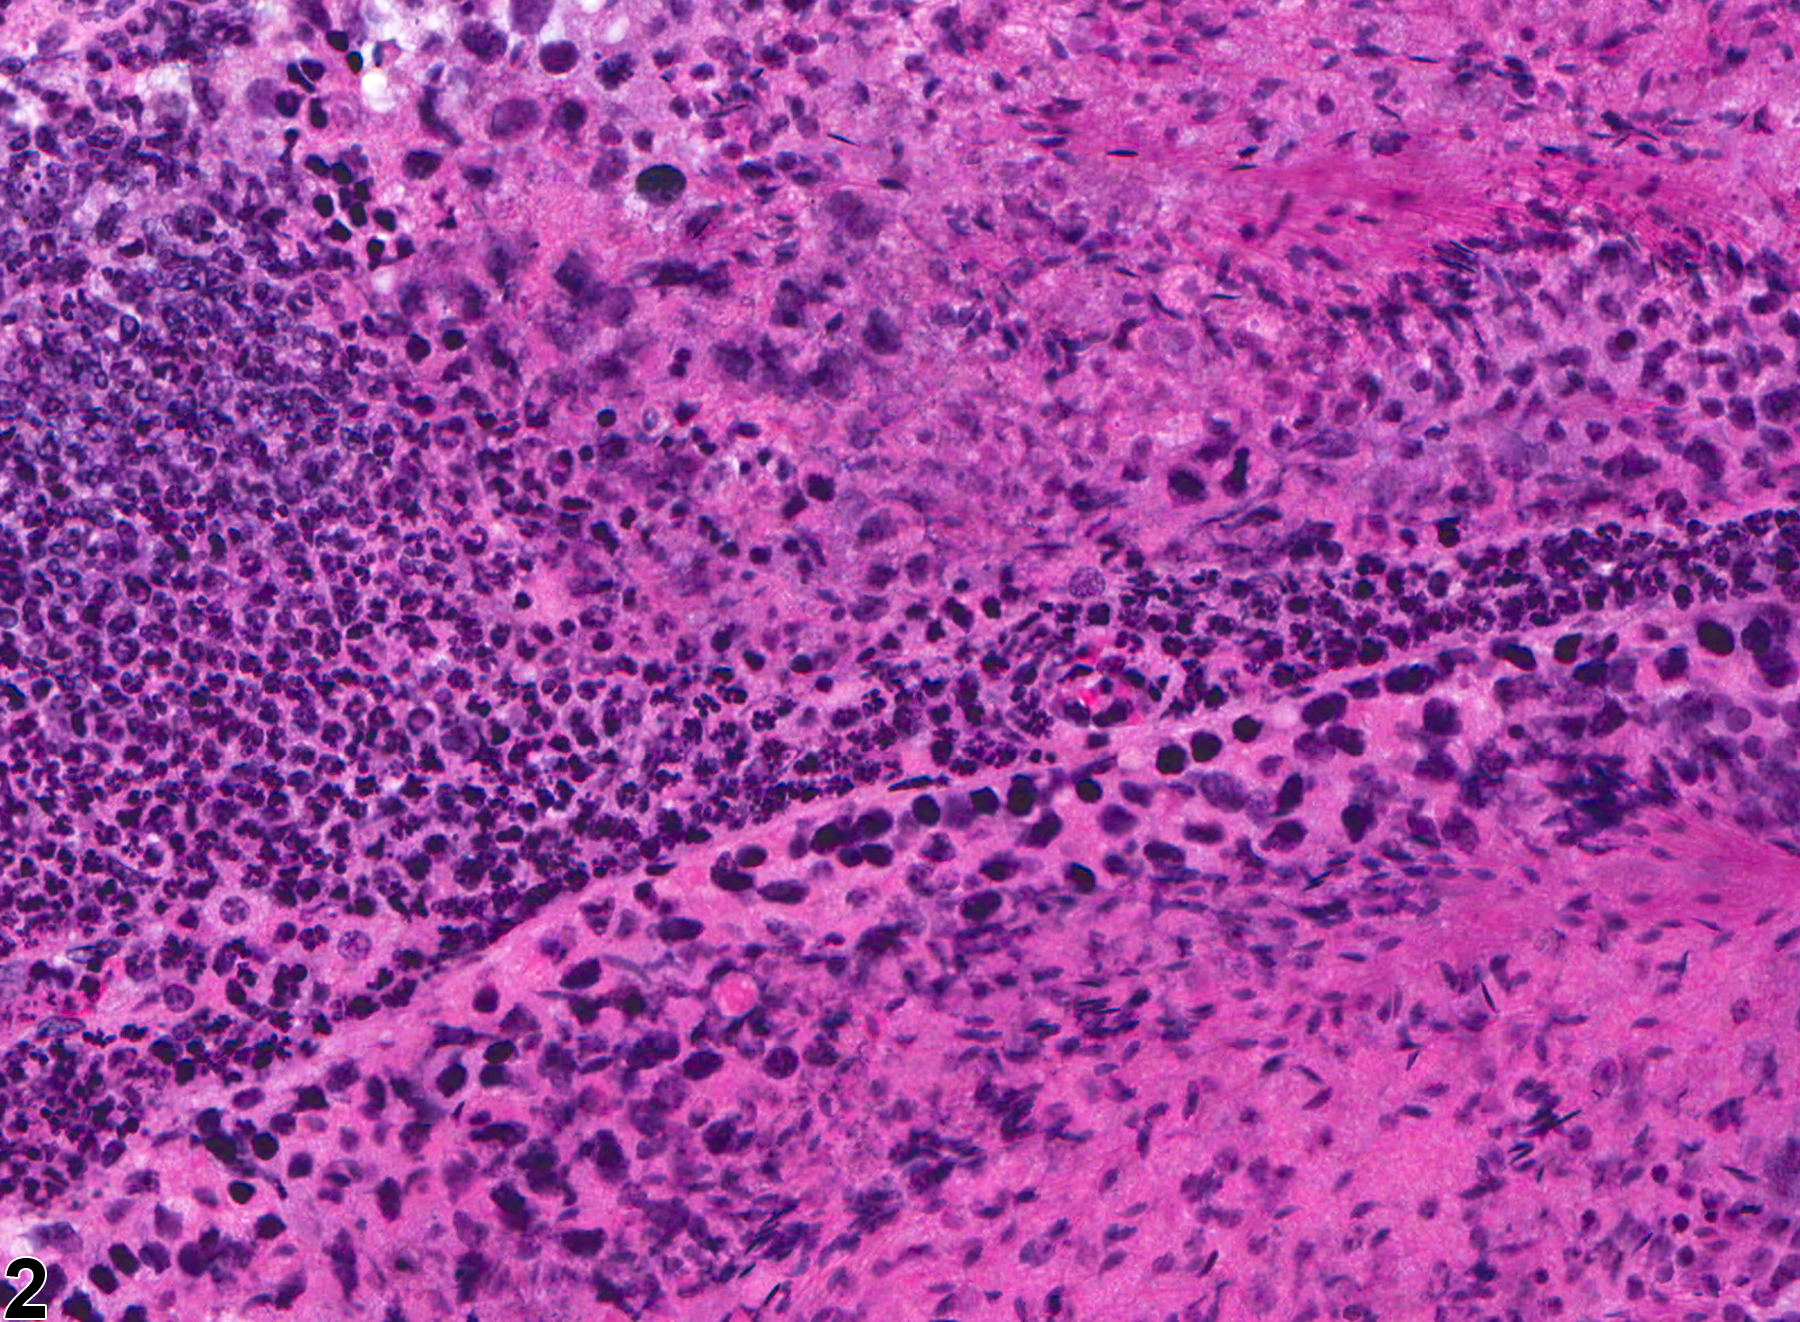 Image of inflammation in the testis from a male B6C3F1 mouse in a chronic study